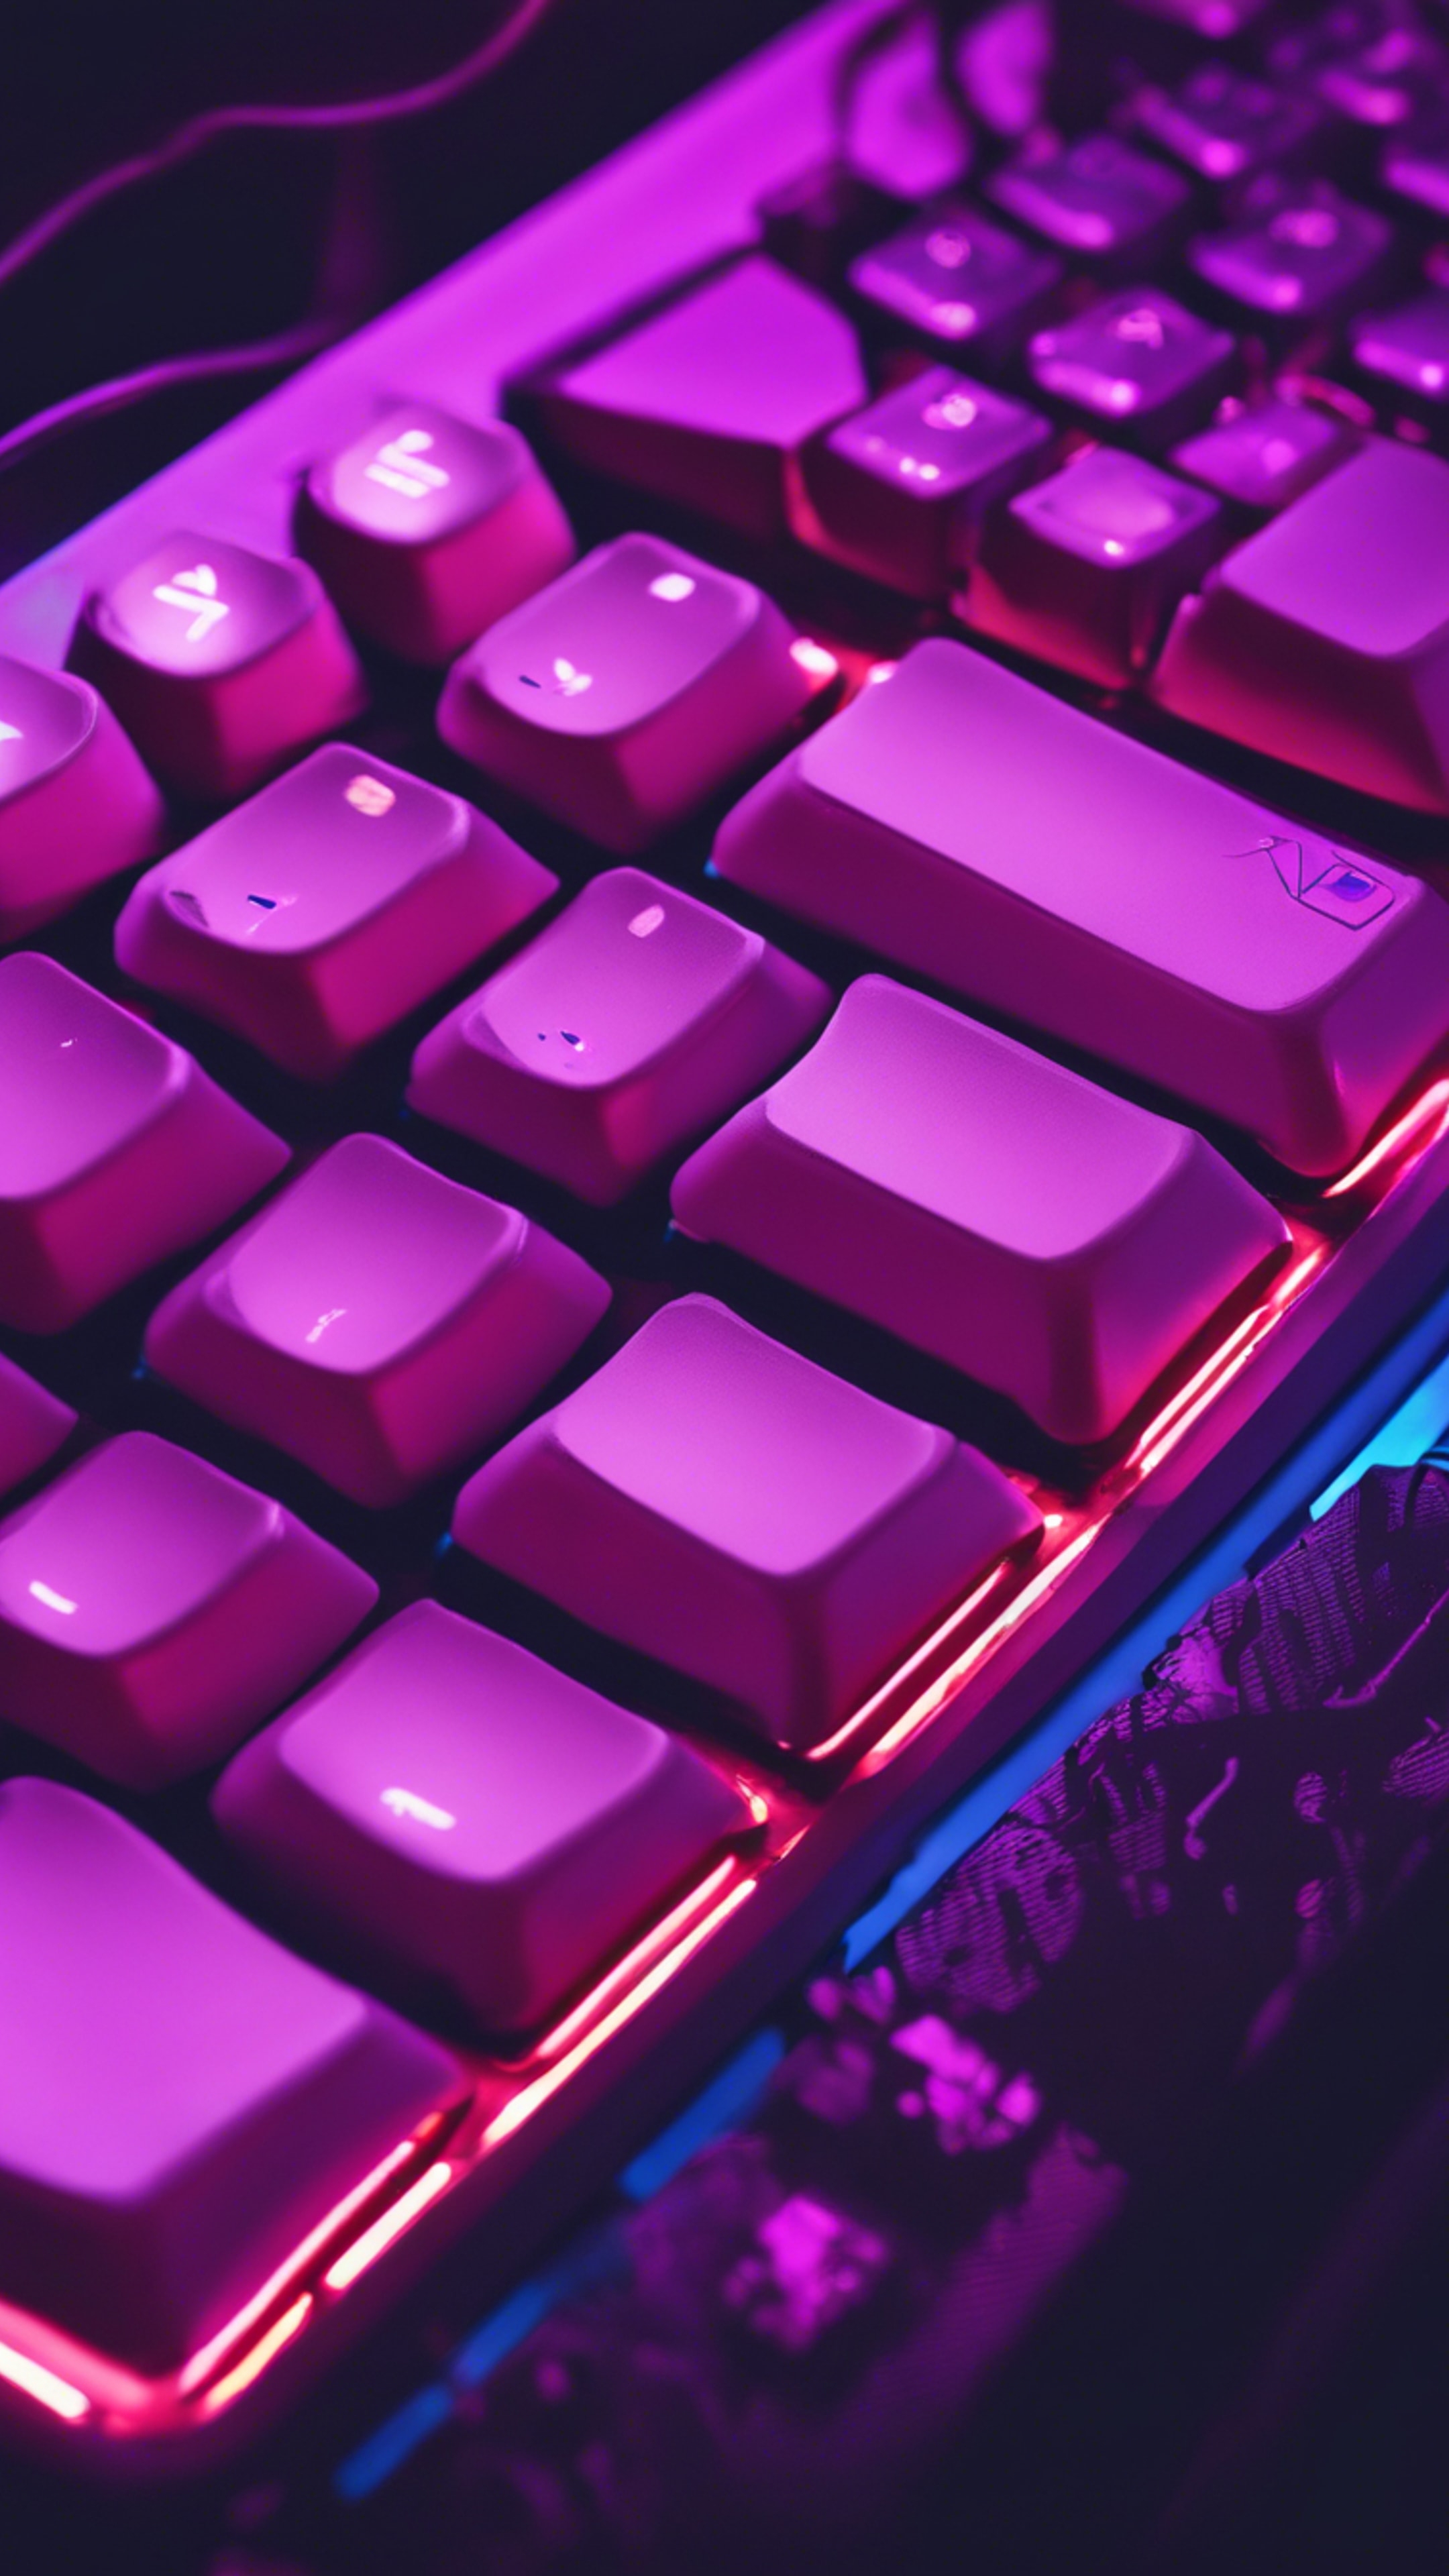 A detailed close-up image of a neon purple backlit gaming keyboard in a dark room. Tapet[fb3f2373aec546b8b630]